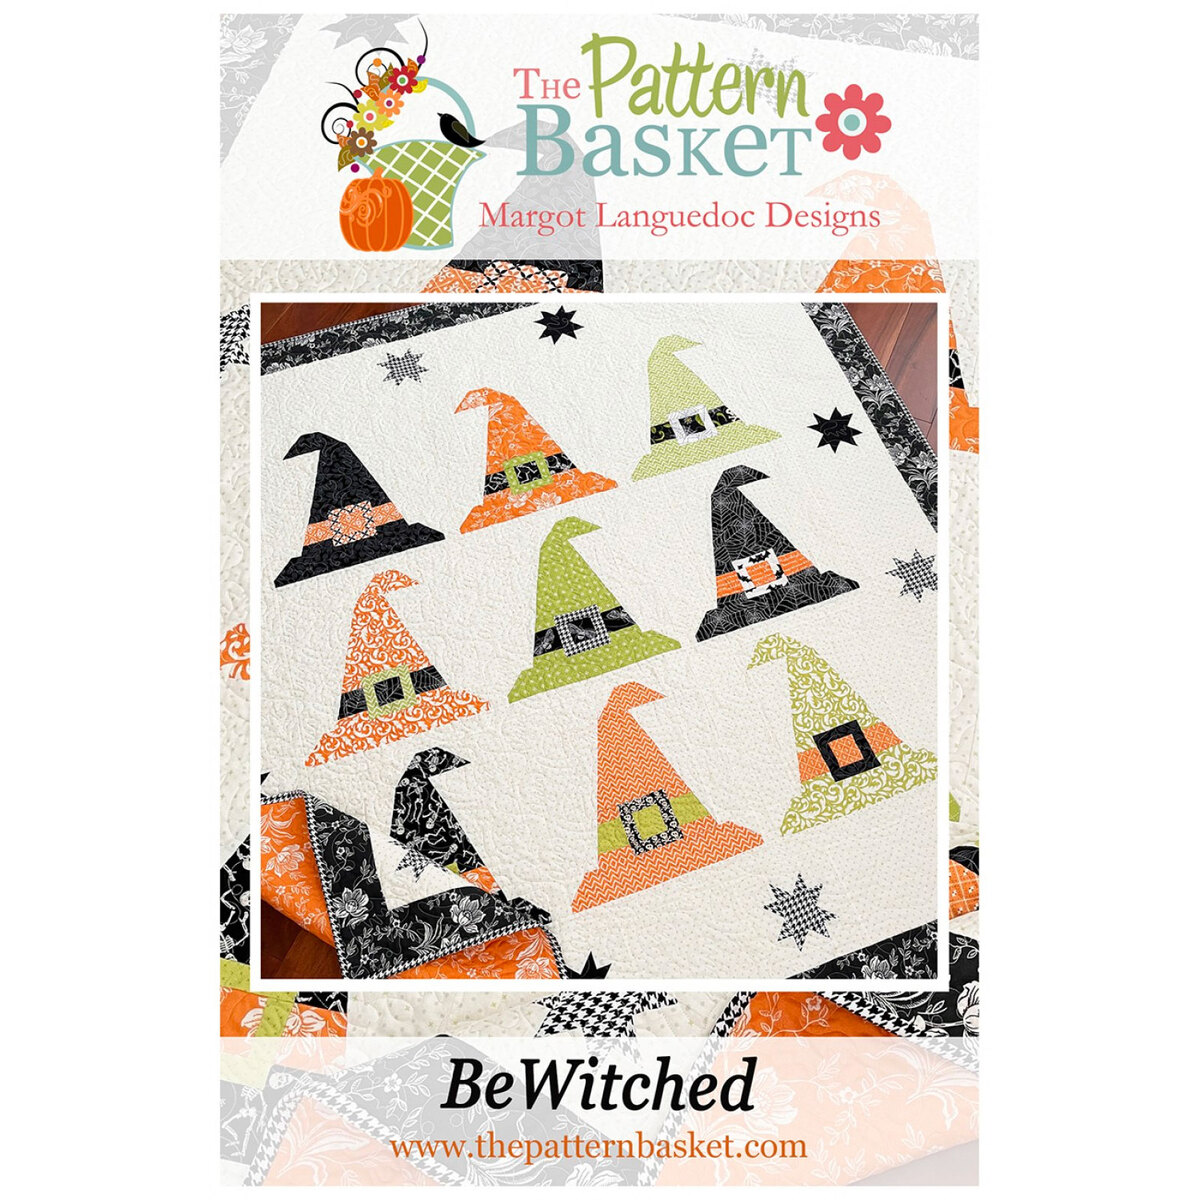 Quilted Witch Quilt Kit, Featuring Bee Dots by Lori Holt